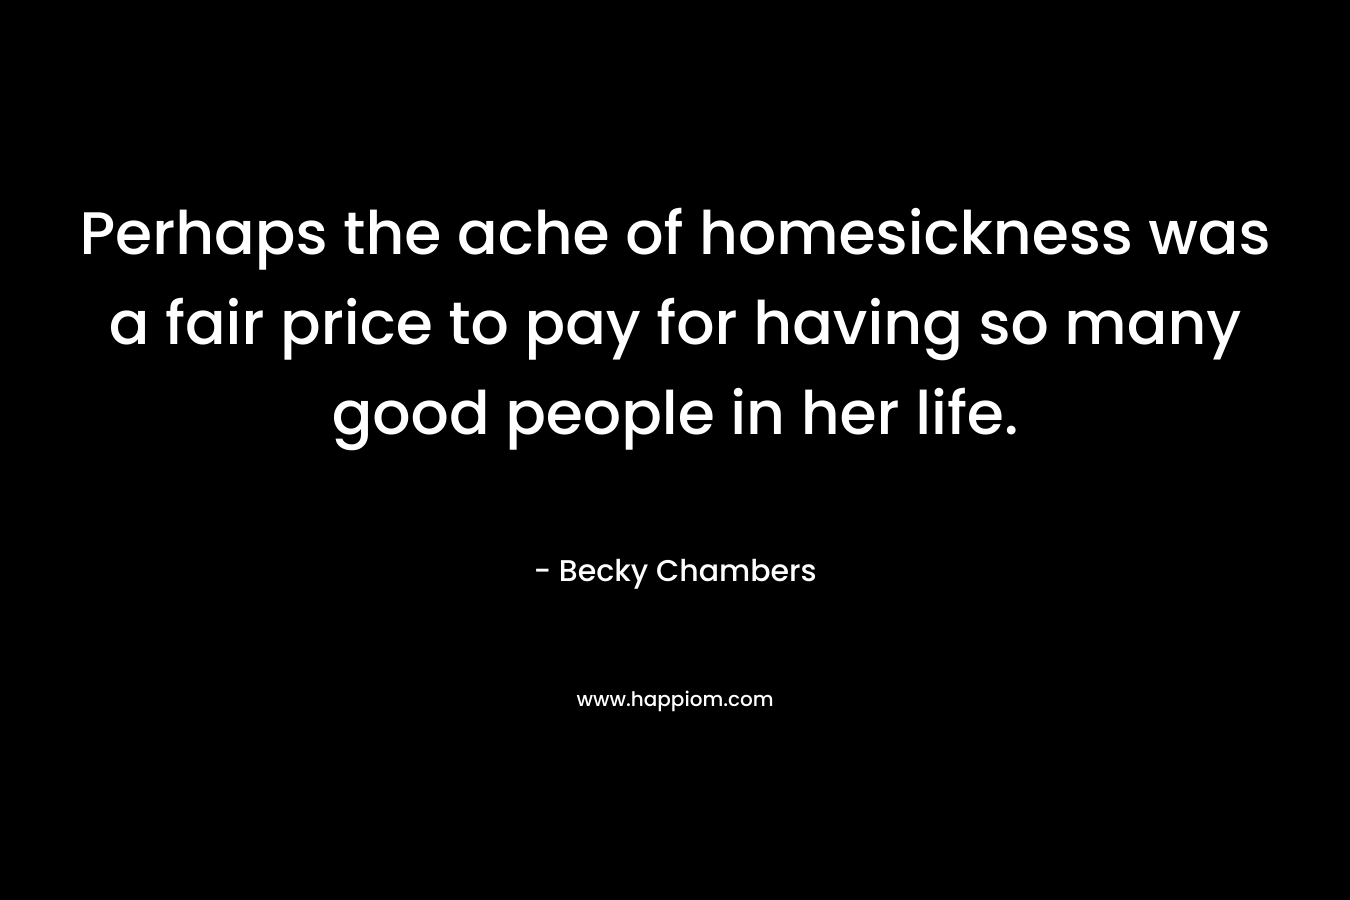 Perhaps the ache of homesickness was a fair price to pay for having so many good people in her life.